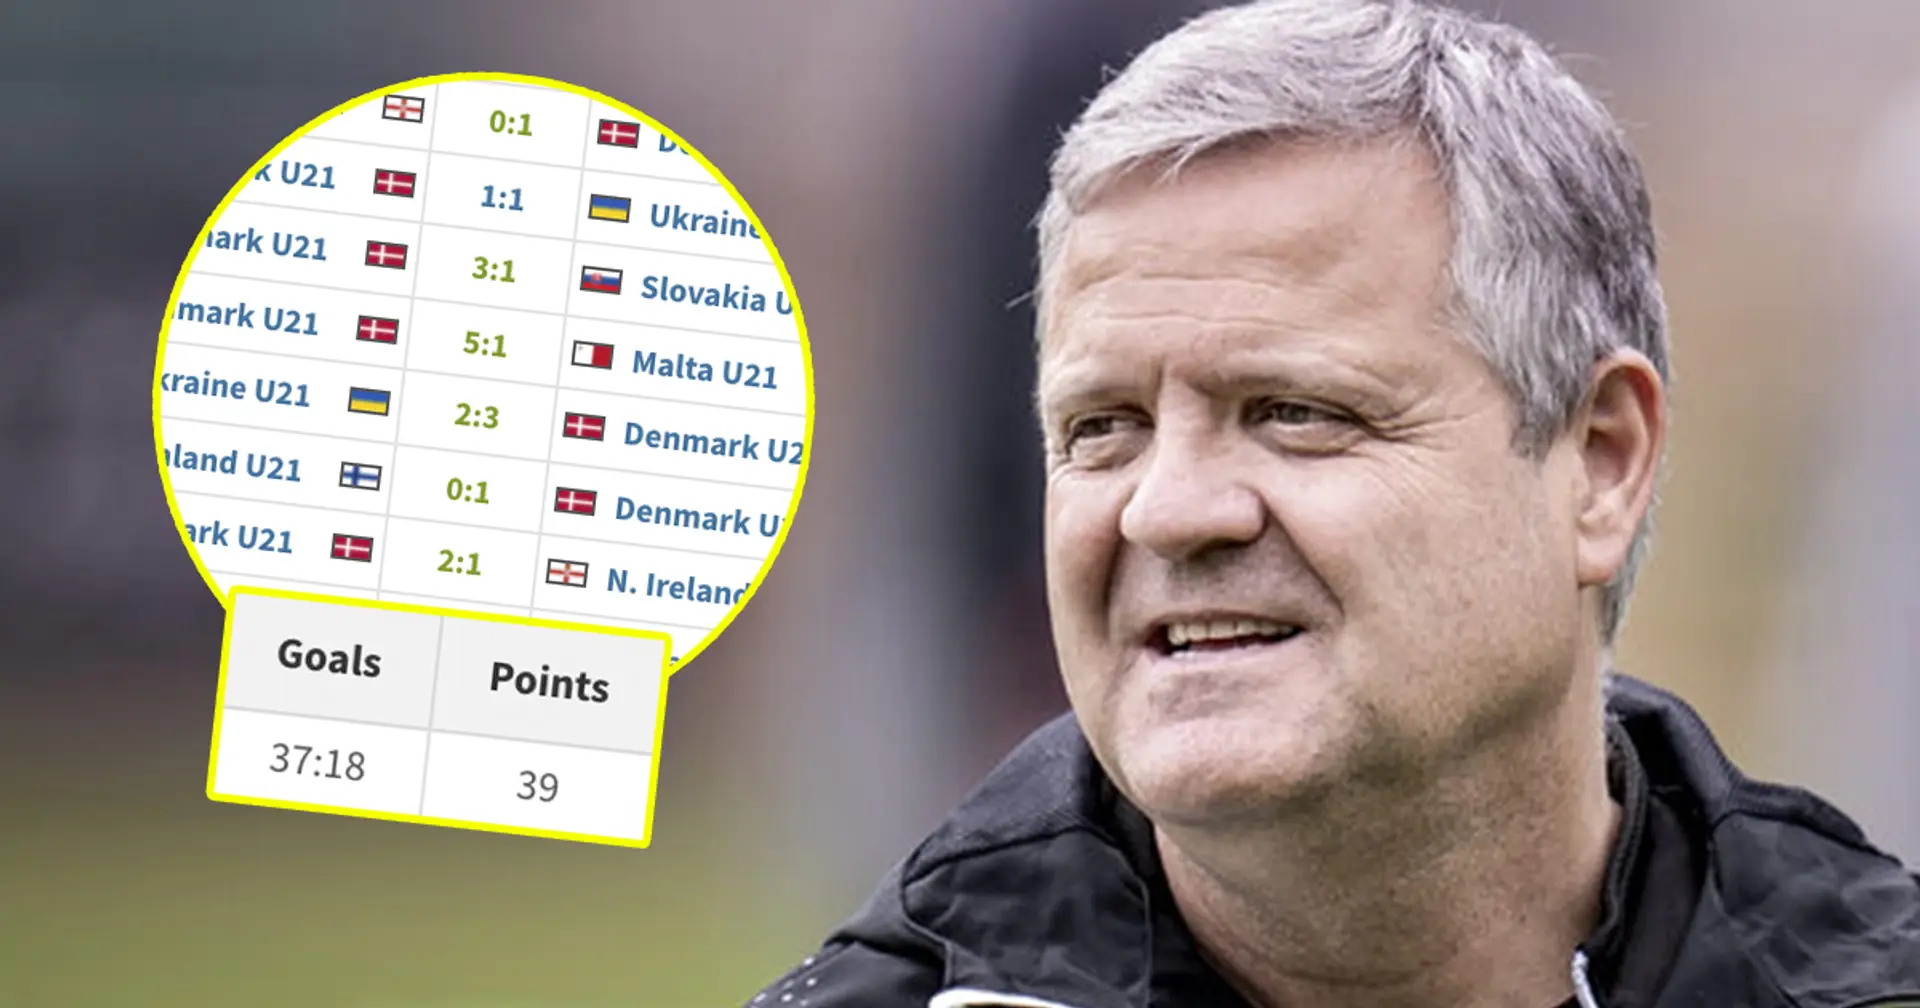 Ex-Barca coach Capellas comes back after 10 years – his record with Denmark U21 is something else